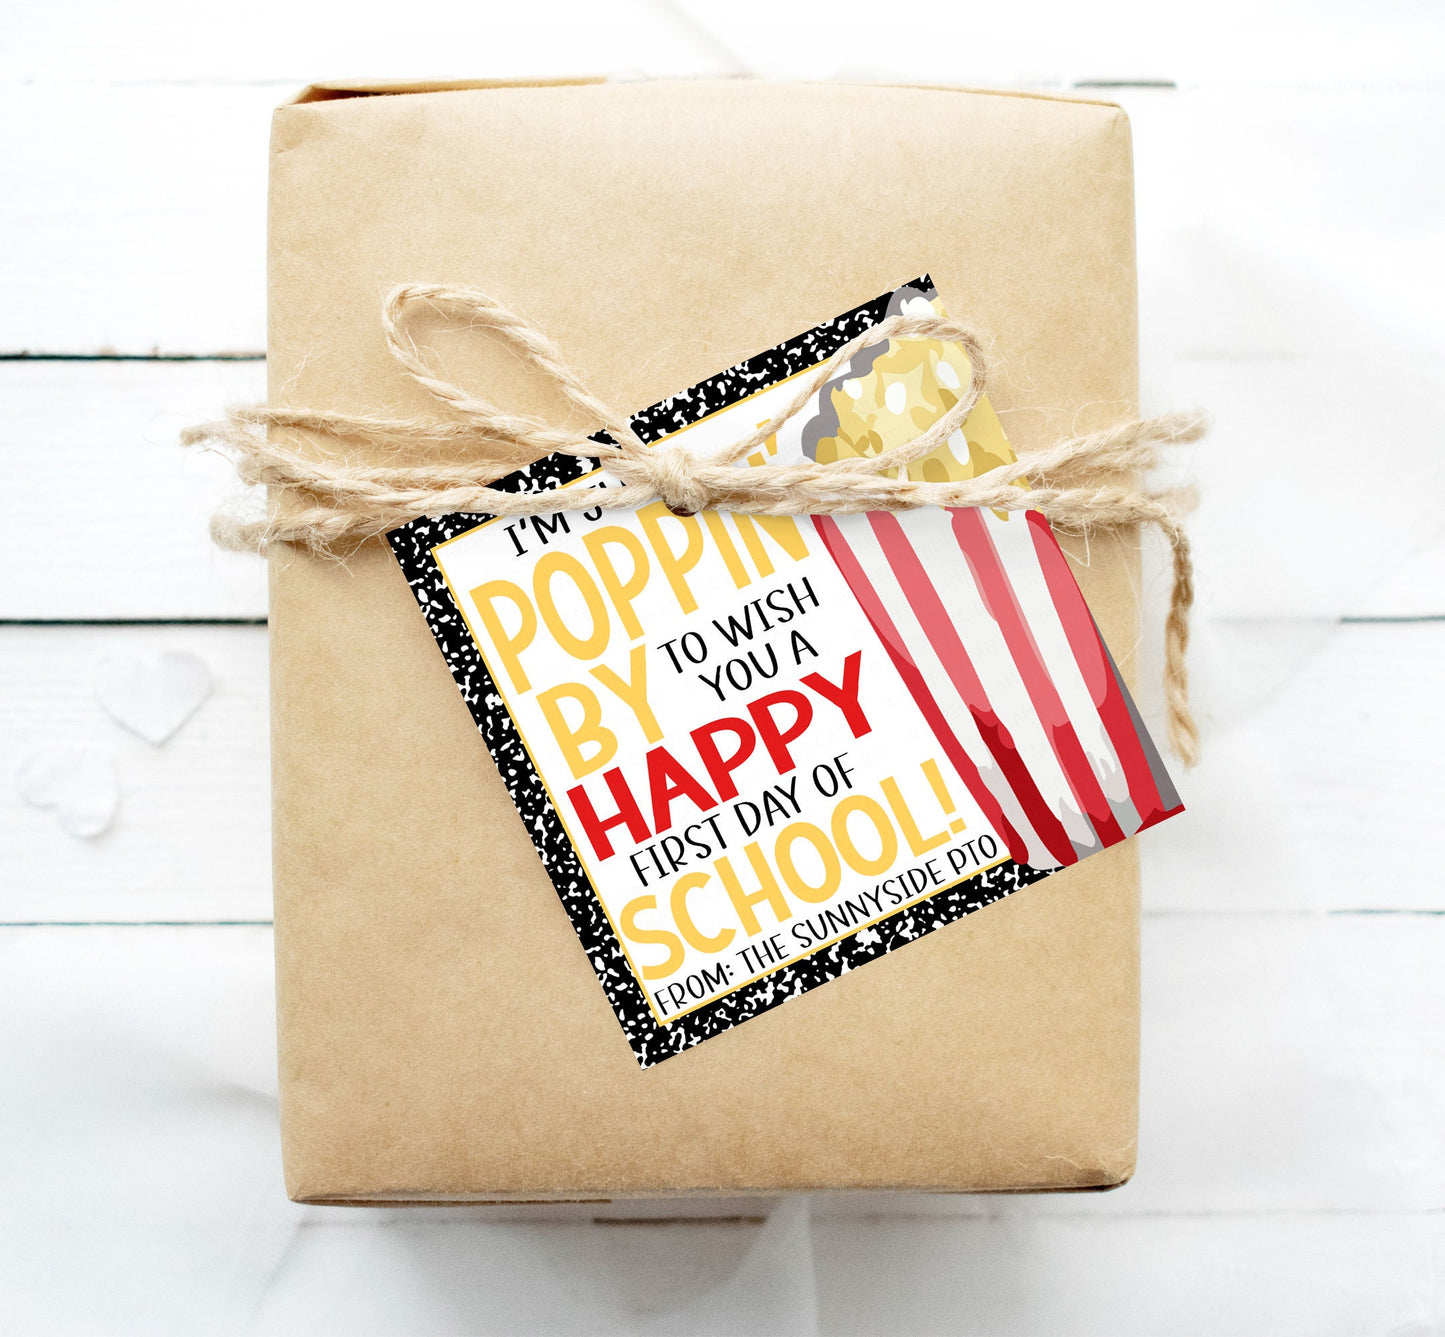 Back To School Popcorn Gift Tag, Poppin' By To Wish You A Happy First Day Of School, Gift For Teachers Students Staff PTO PTA, Printable